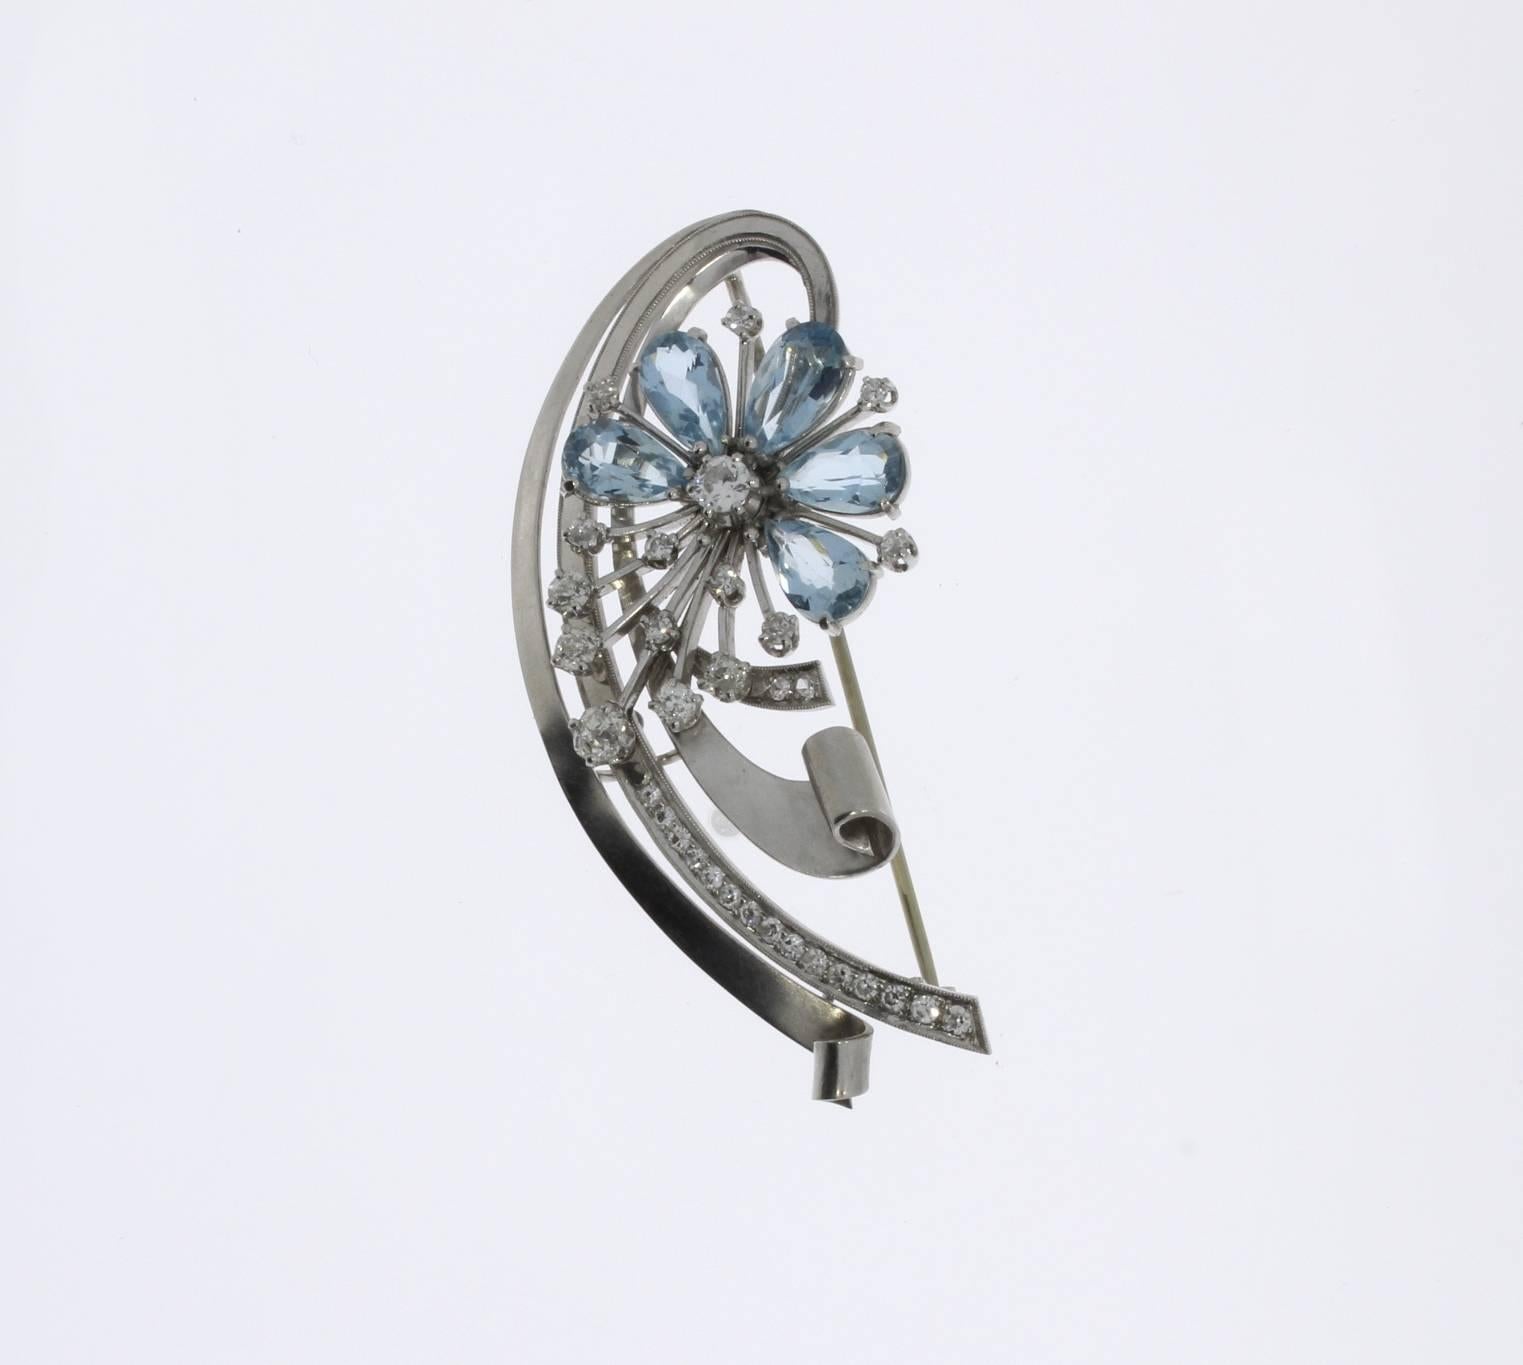 Retro Charming Aquamarine and Diamond Floral Shaped Brooch For Sale